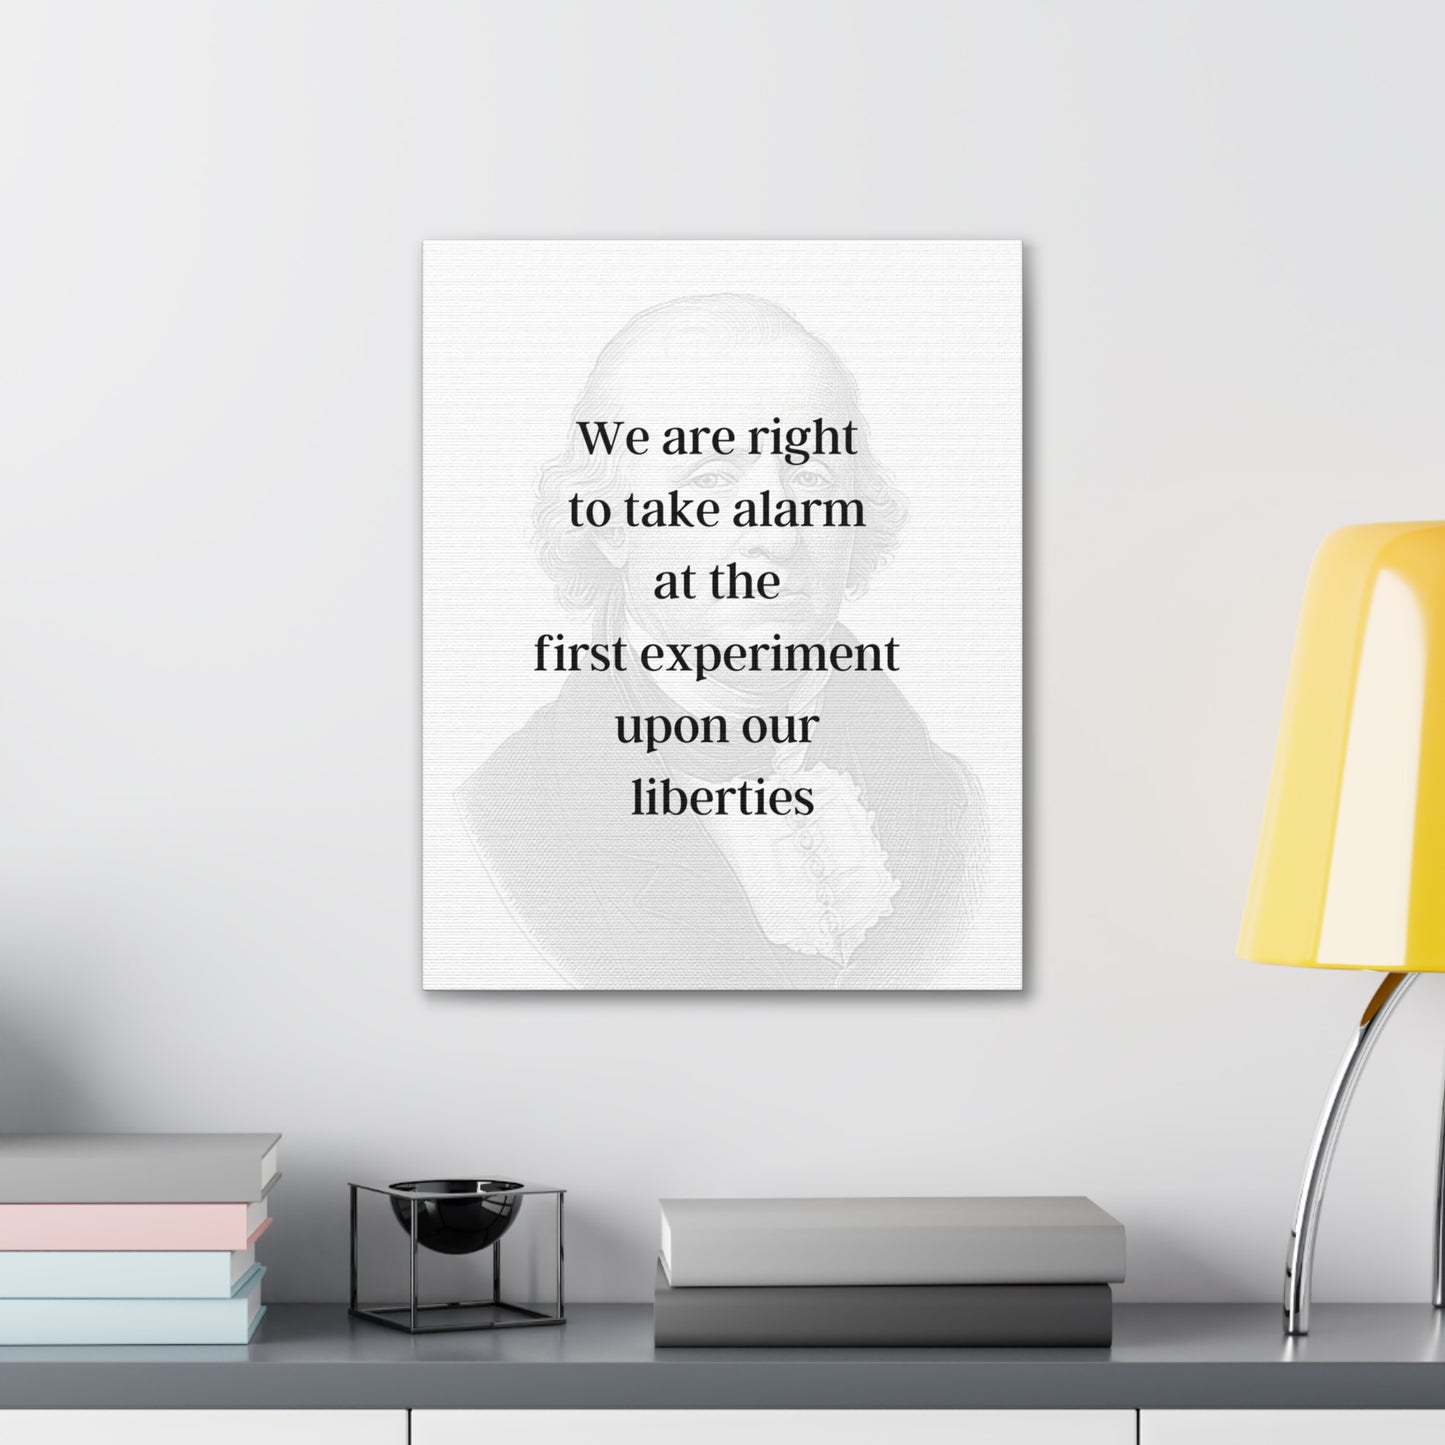 James Madison Quote 4, Canvas Art, Light Print, 4th President of the United States, American Patriots, AI Art, Political Art, Canvas Prints, Presidential Portraits, Presidential Quotes, Inspirational Quotes